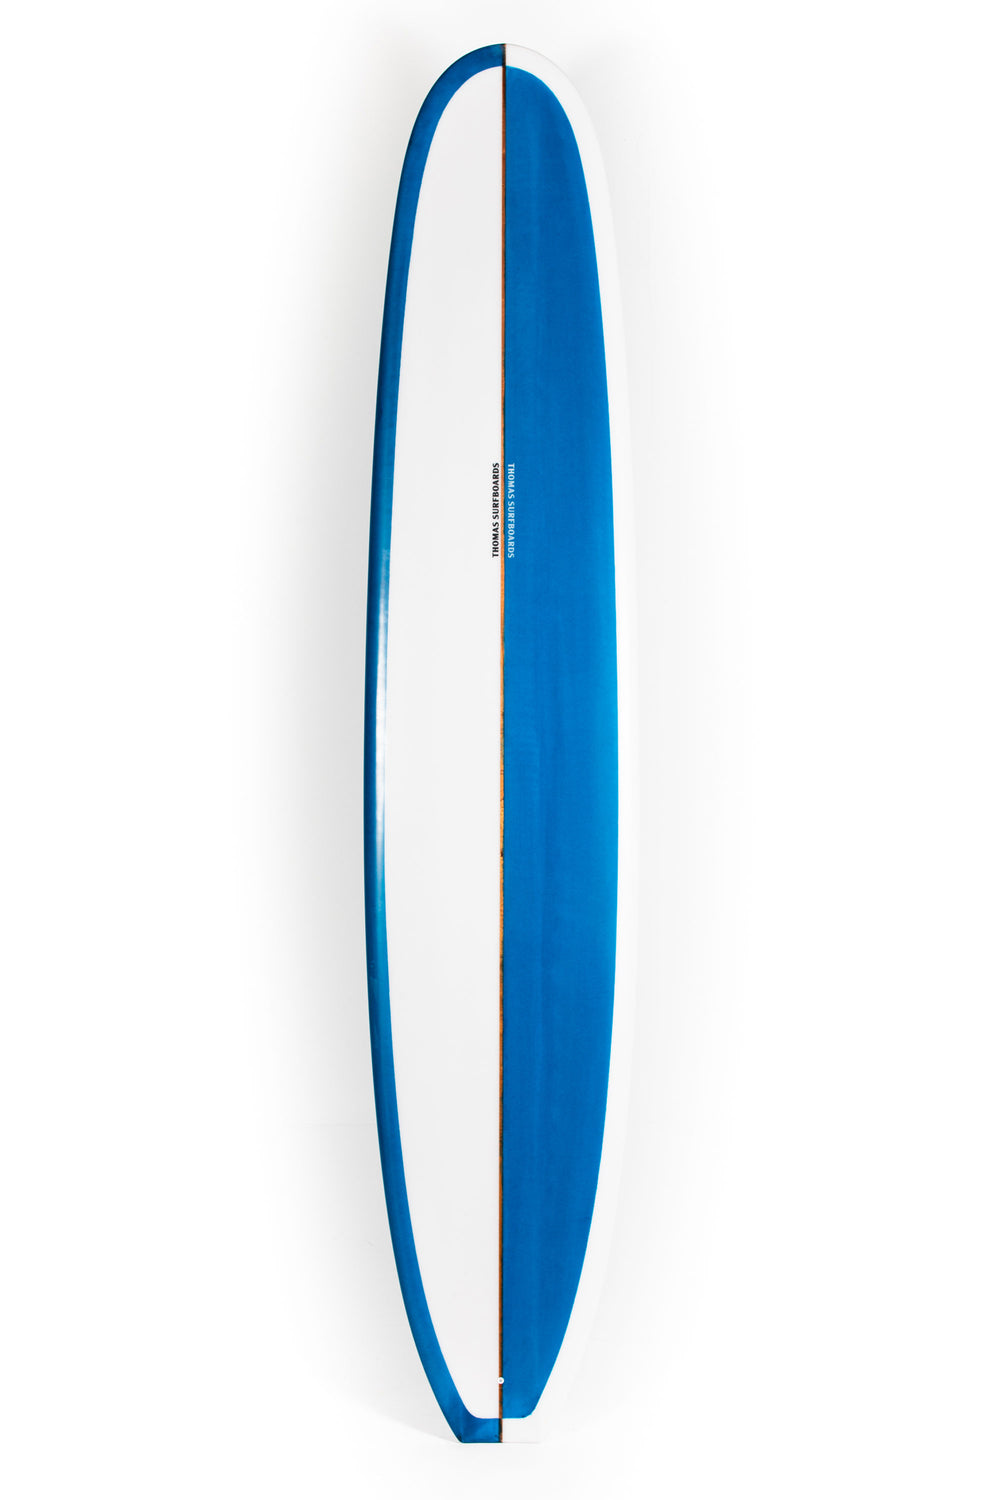 Pukas Surf Shop - Thomas Surfboards - SCOOP TAIL NOSERIDER - 9'8